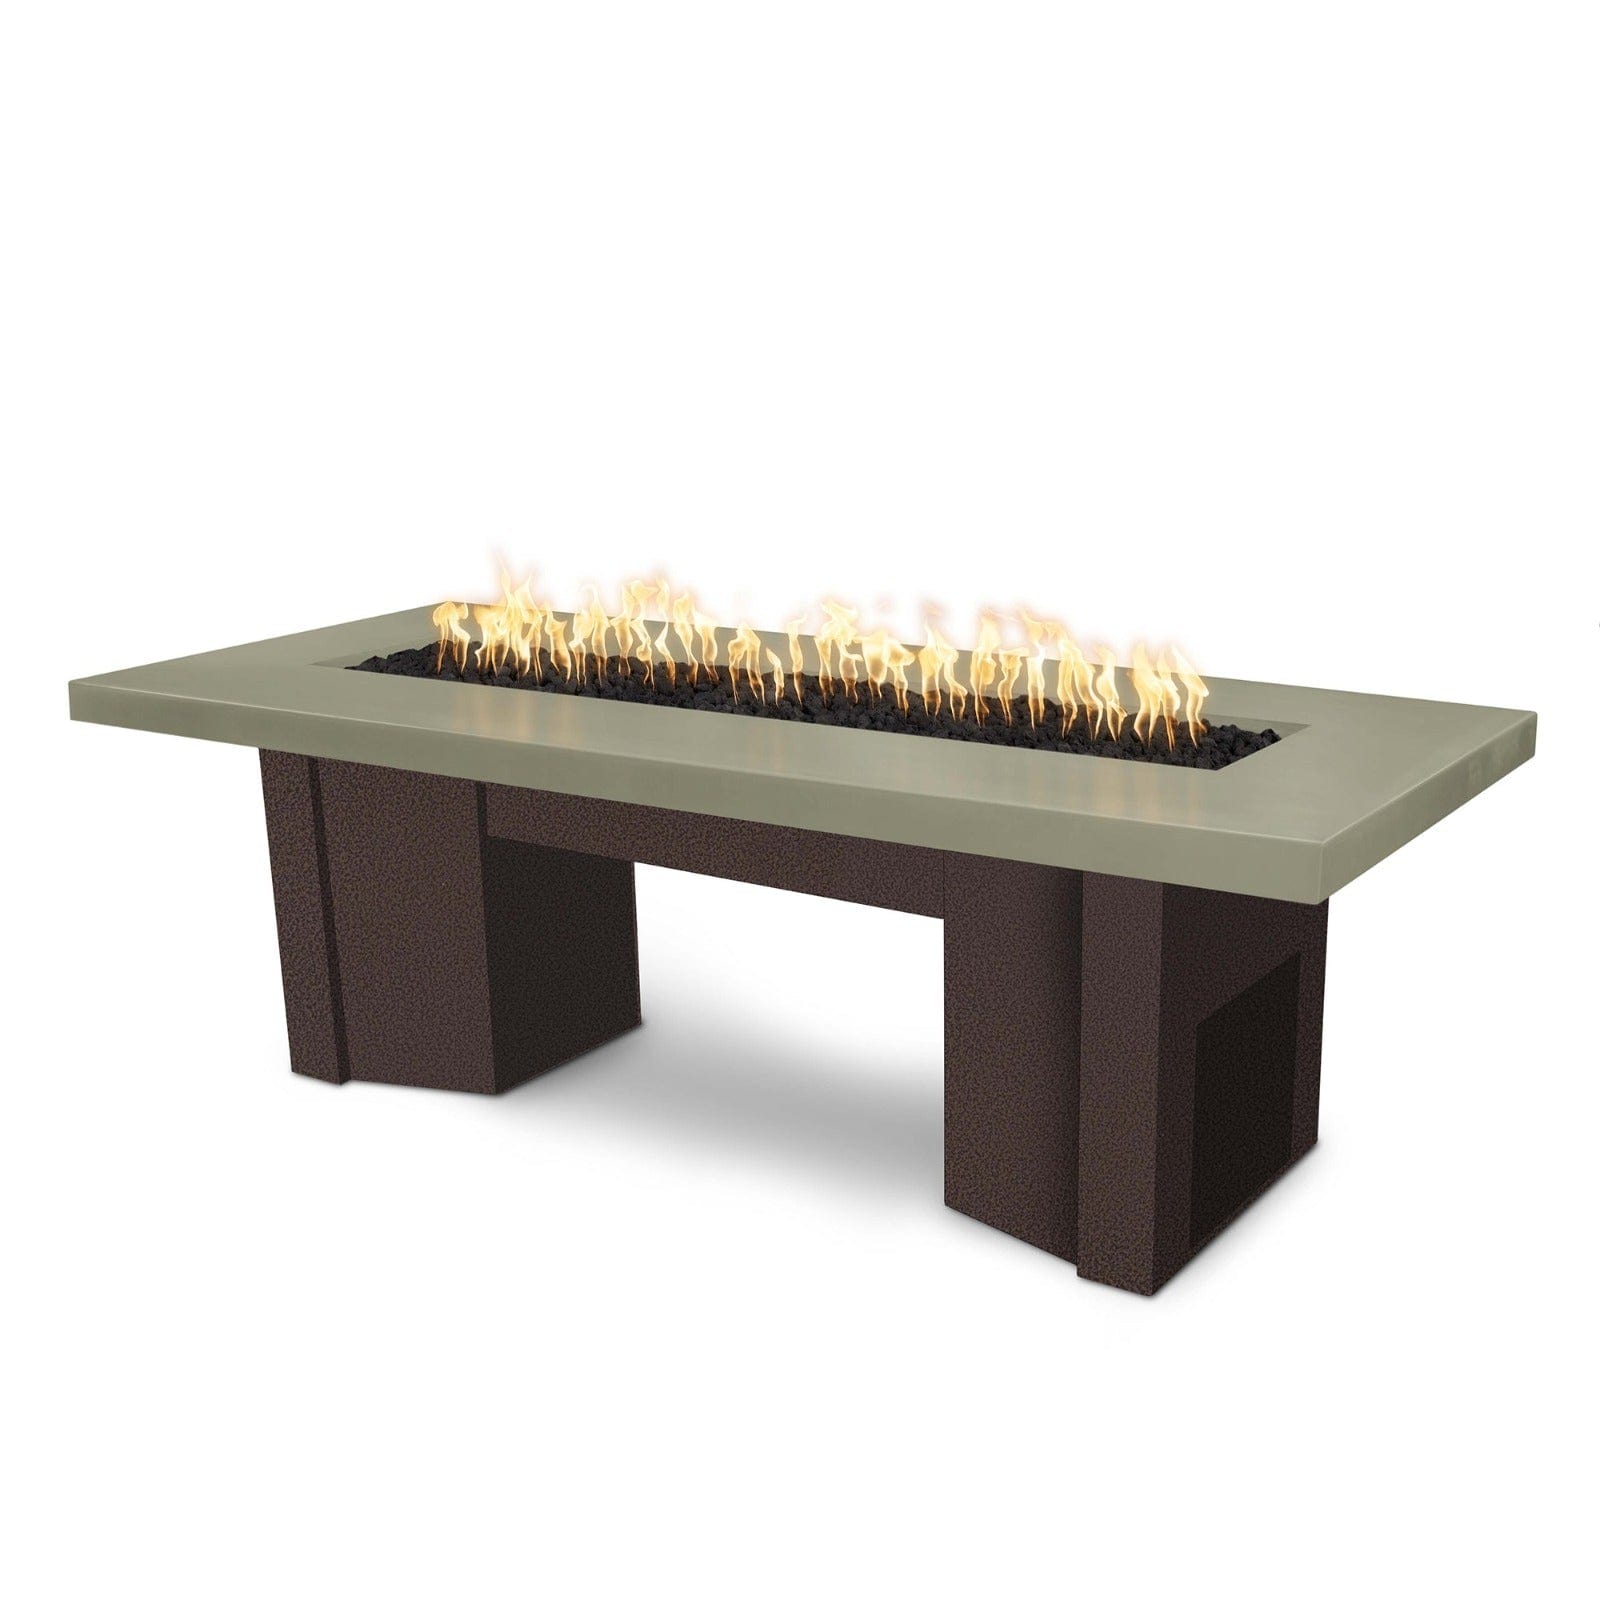 The Outdoor Plus Fire Features Ash (-ASH) / Copper Vein Powder Coated Steel (-CPV) The Outdoor Plus 60" Alameda Fire Table Smooth Concrete in Natural Gas - 12V Electronic Ignition / OPT-ALMGFRC60E12V-NG